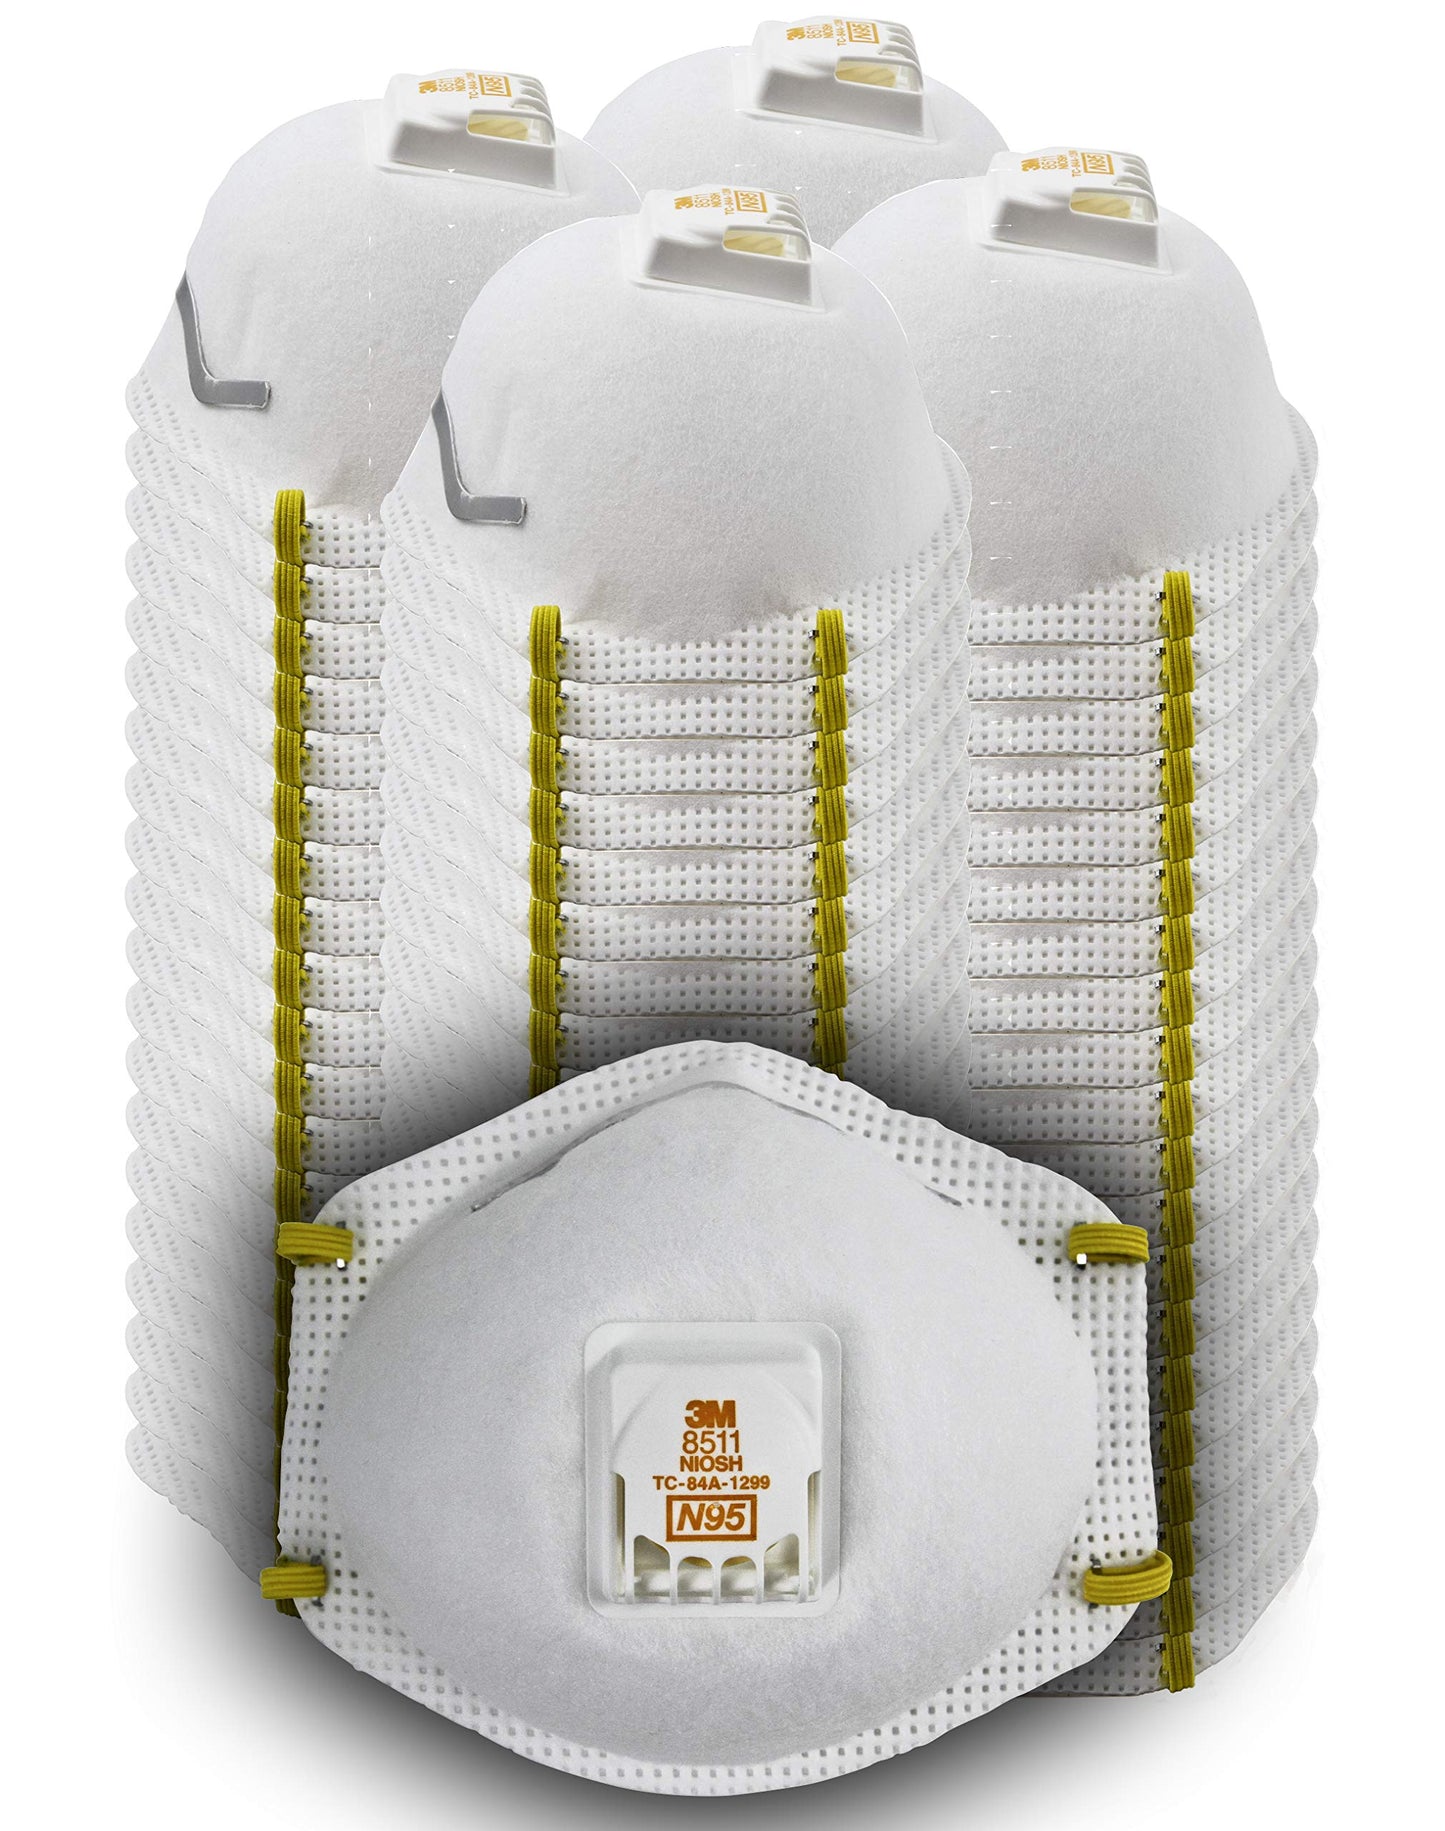 3M 8511 Particulate Disposable Respirator, N95, Pack of 80, Cool Comfort and Fewer Pressure Points with Dual Point Attachment for Grinding, Sanding,